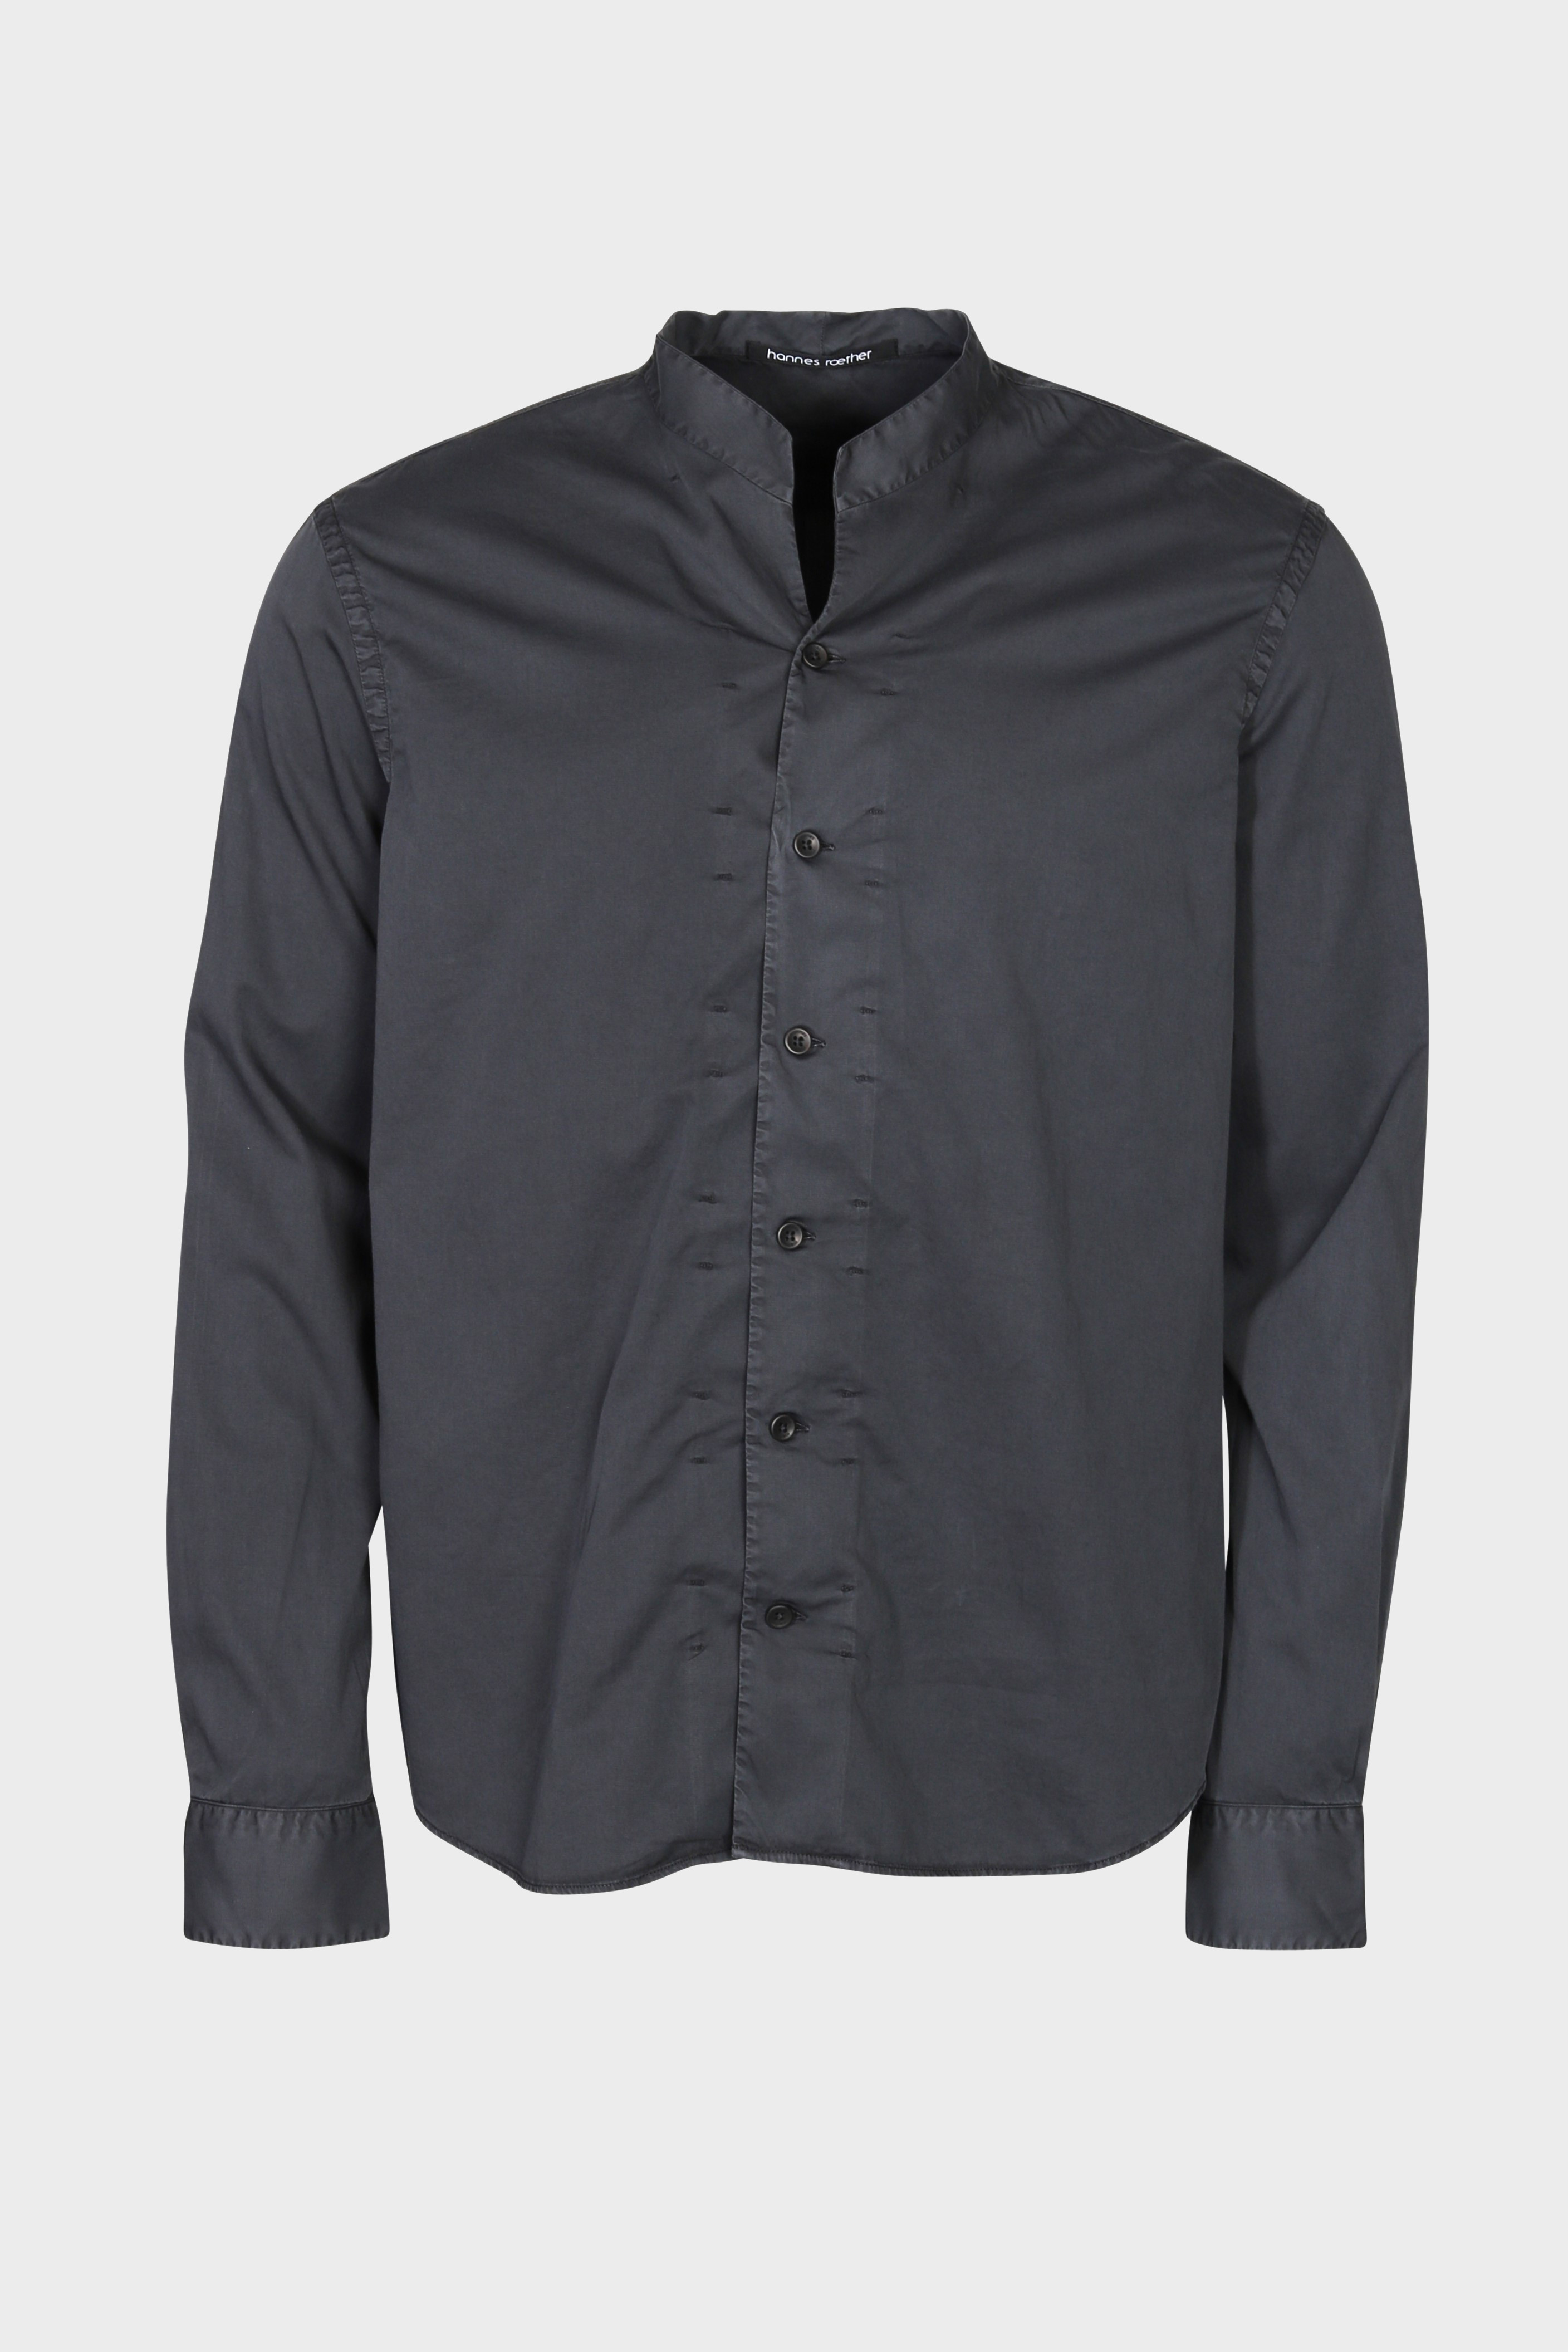 HANNES ROETHER Cotton Shirt in Black 3XL